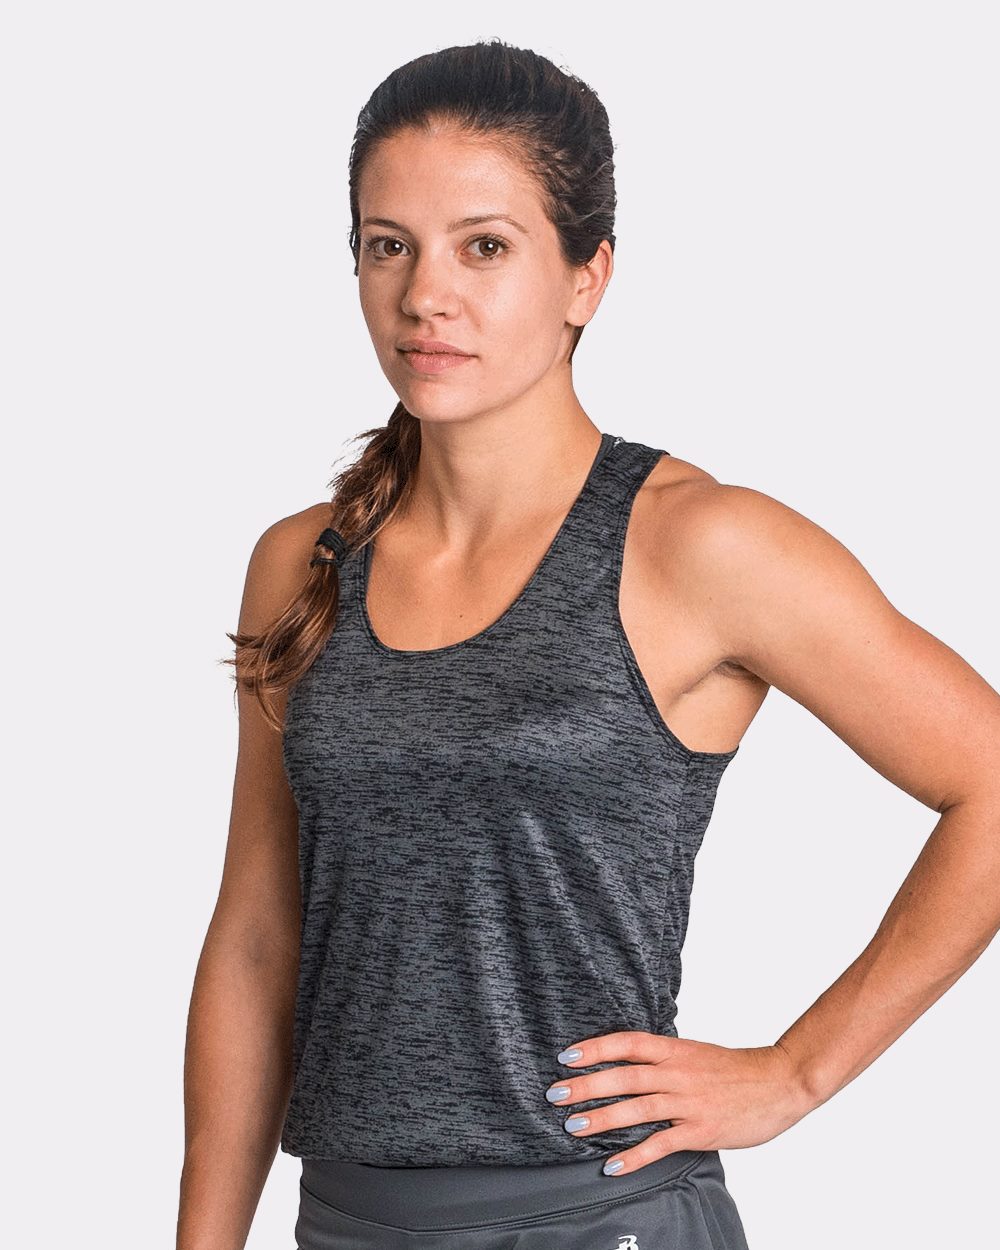 Badger Sport Tank Top Adult Ladies & Youth Sizes Sleeveless Athletic Wicking Shirt Available in 14 